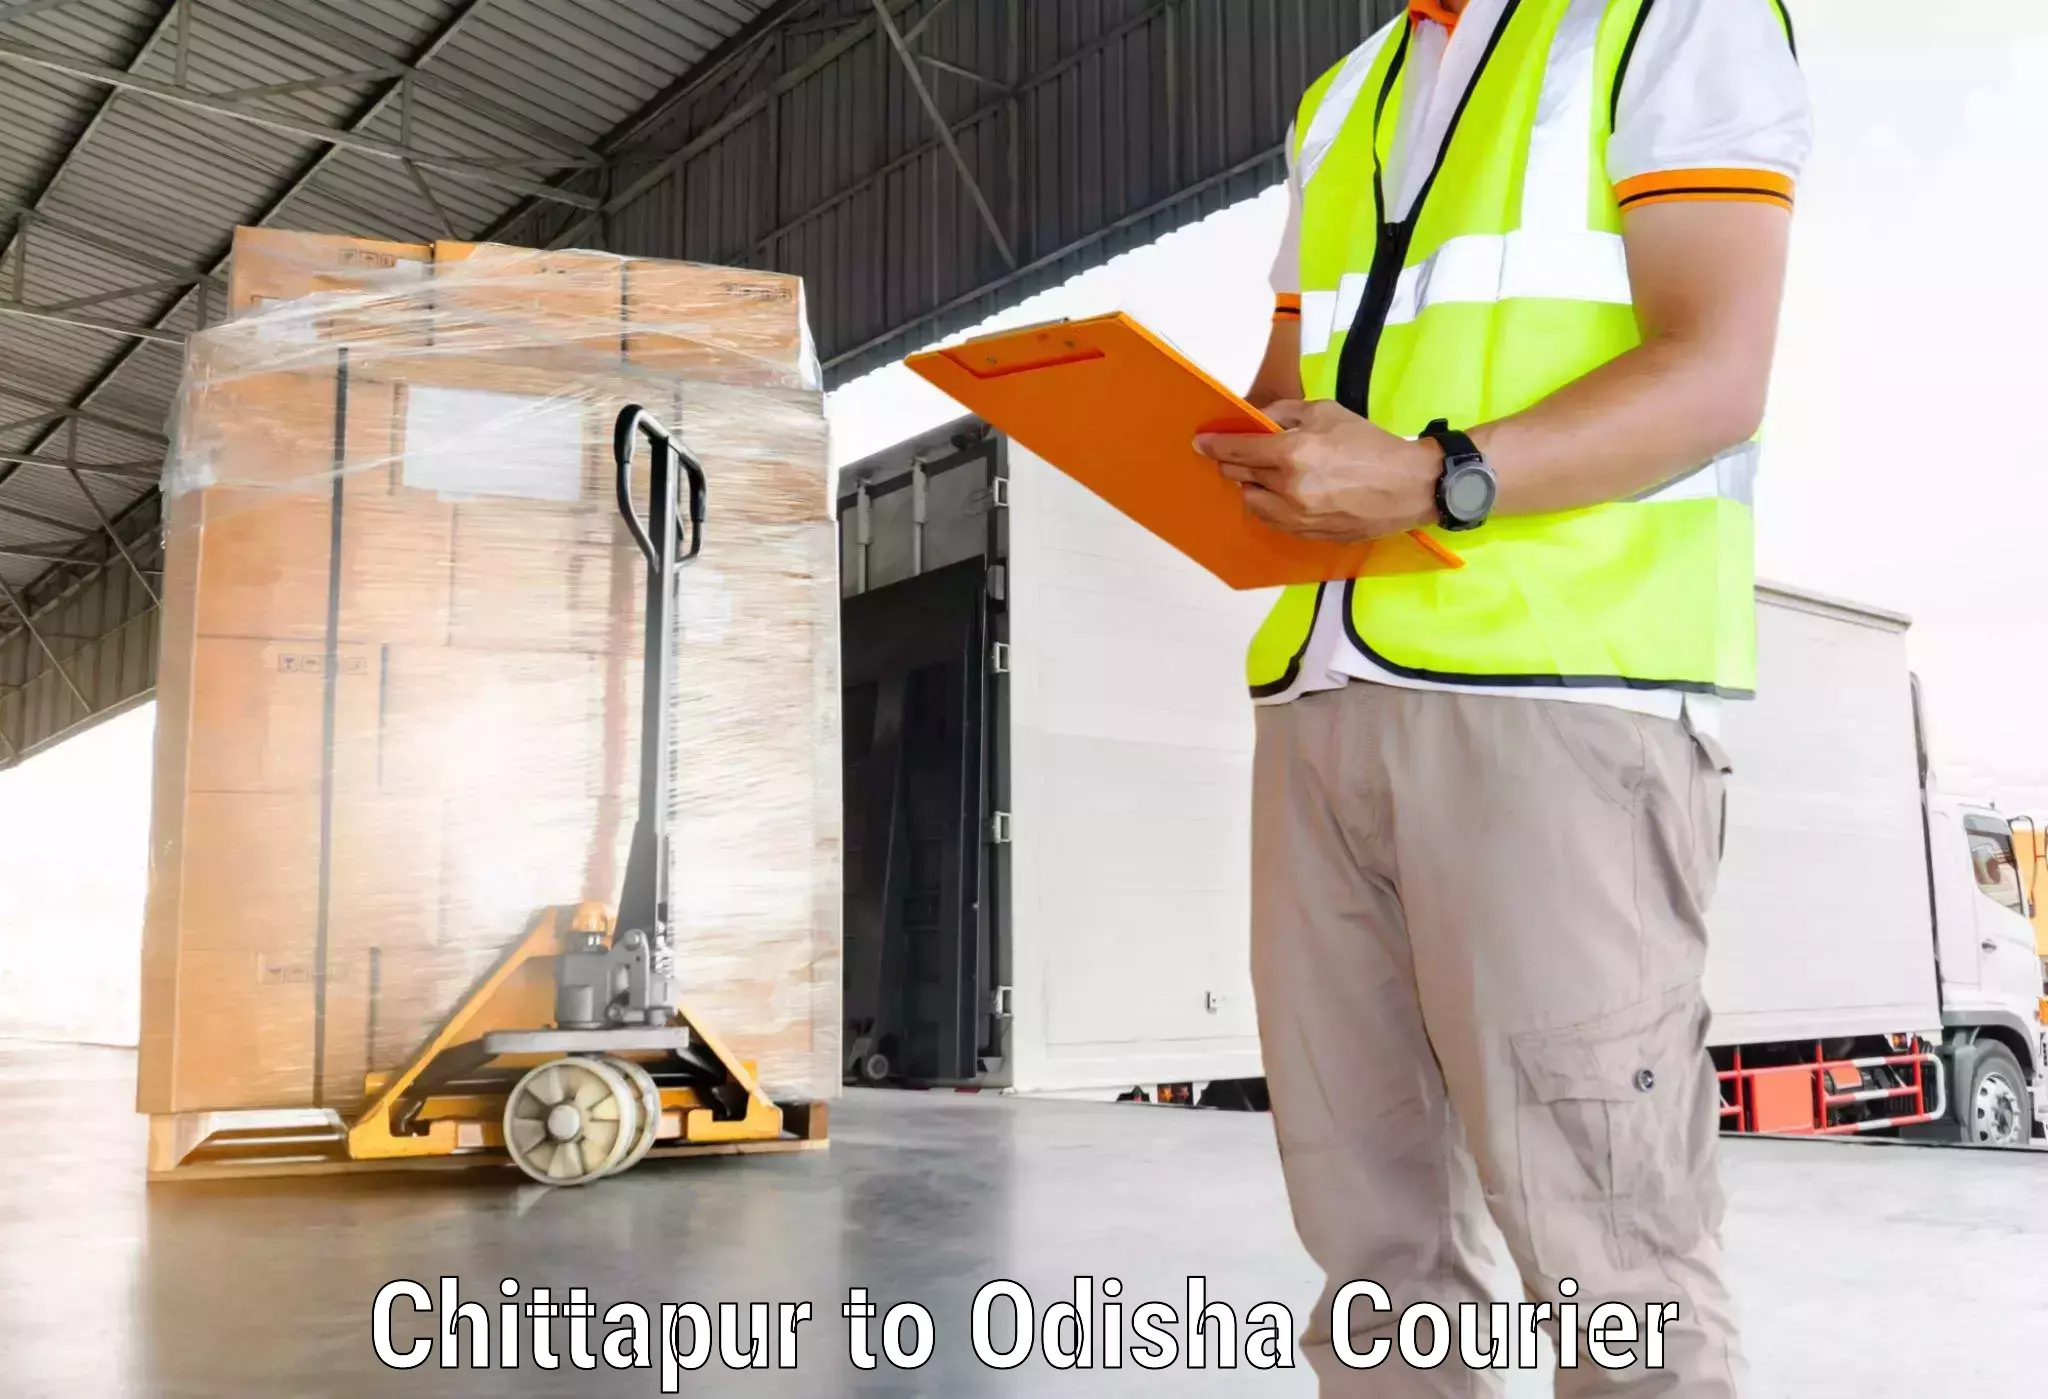 Flexible delivery scheduling in Chittapur to Muribahal